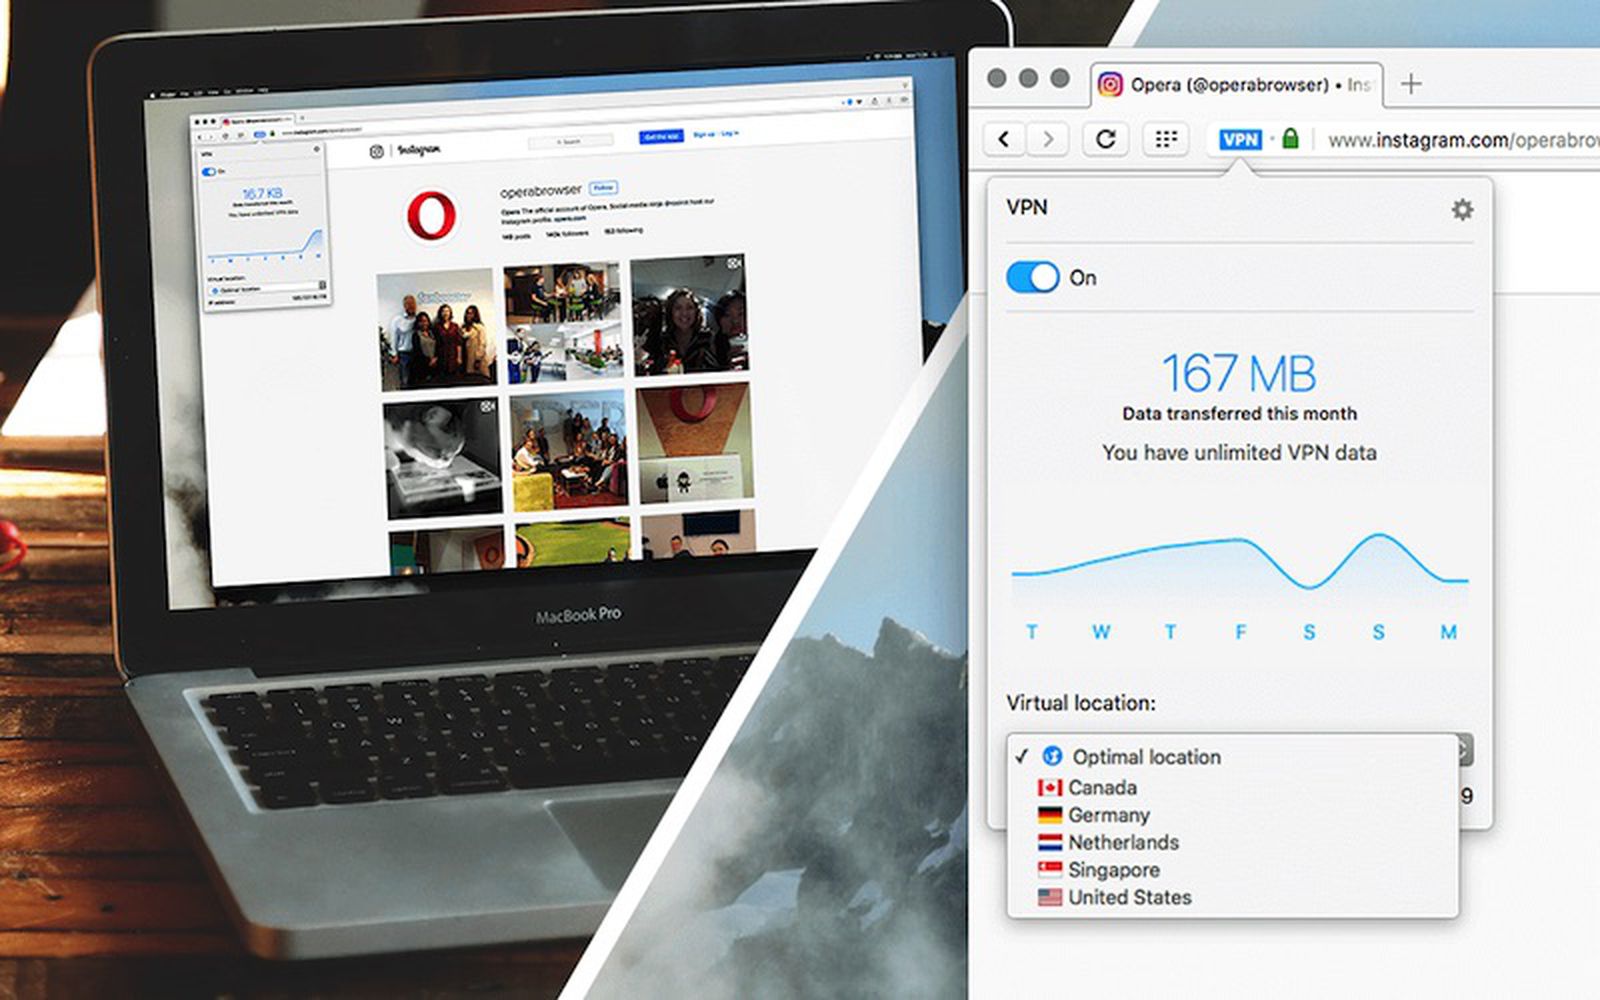 opera browser mac version for 10.9.5